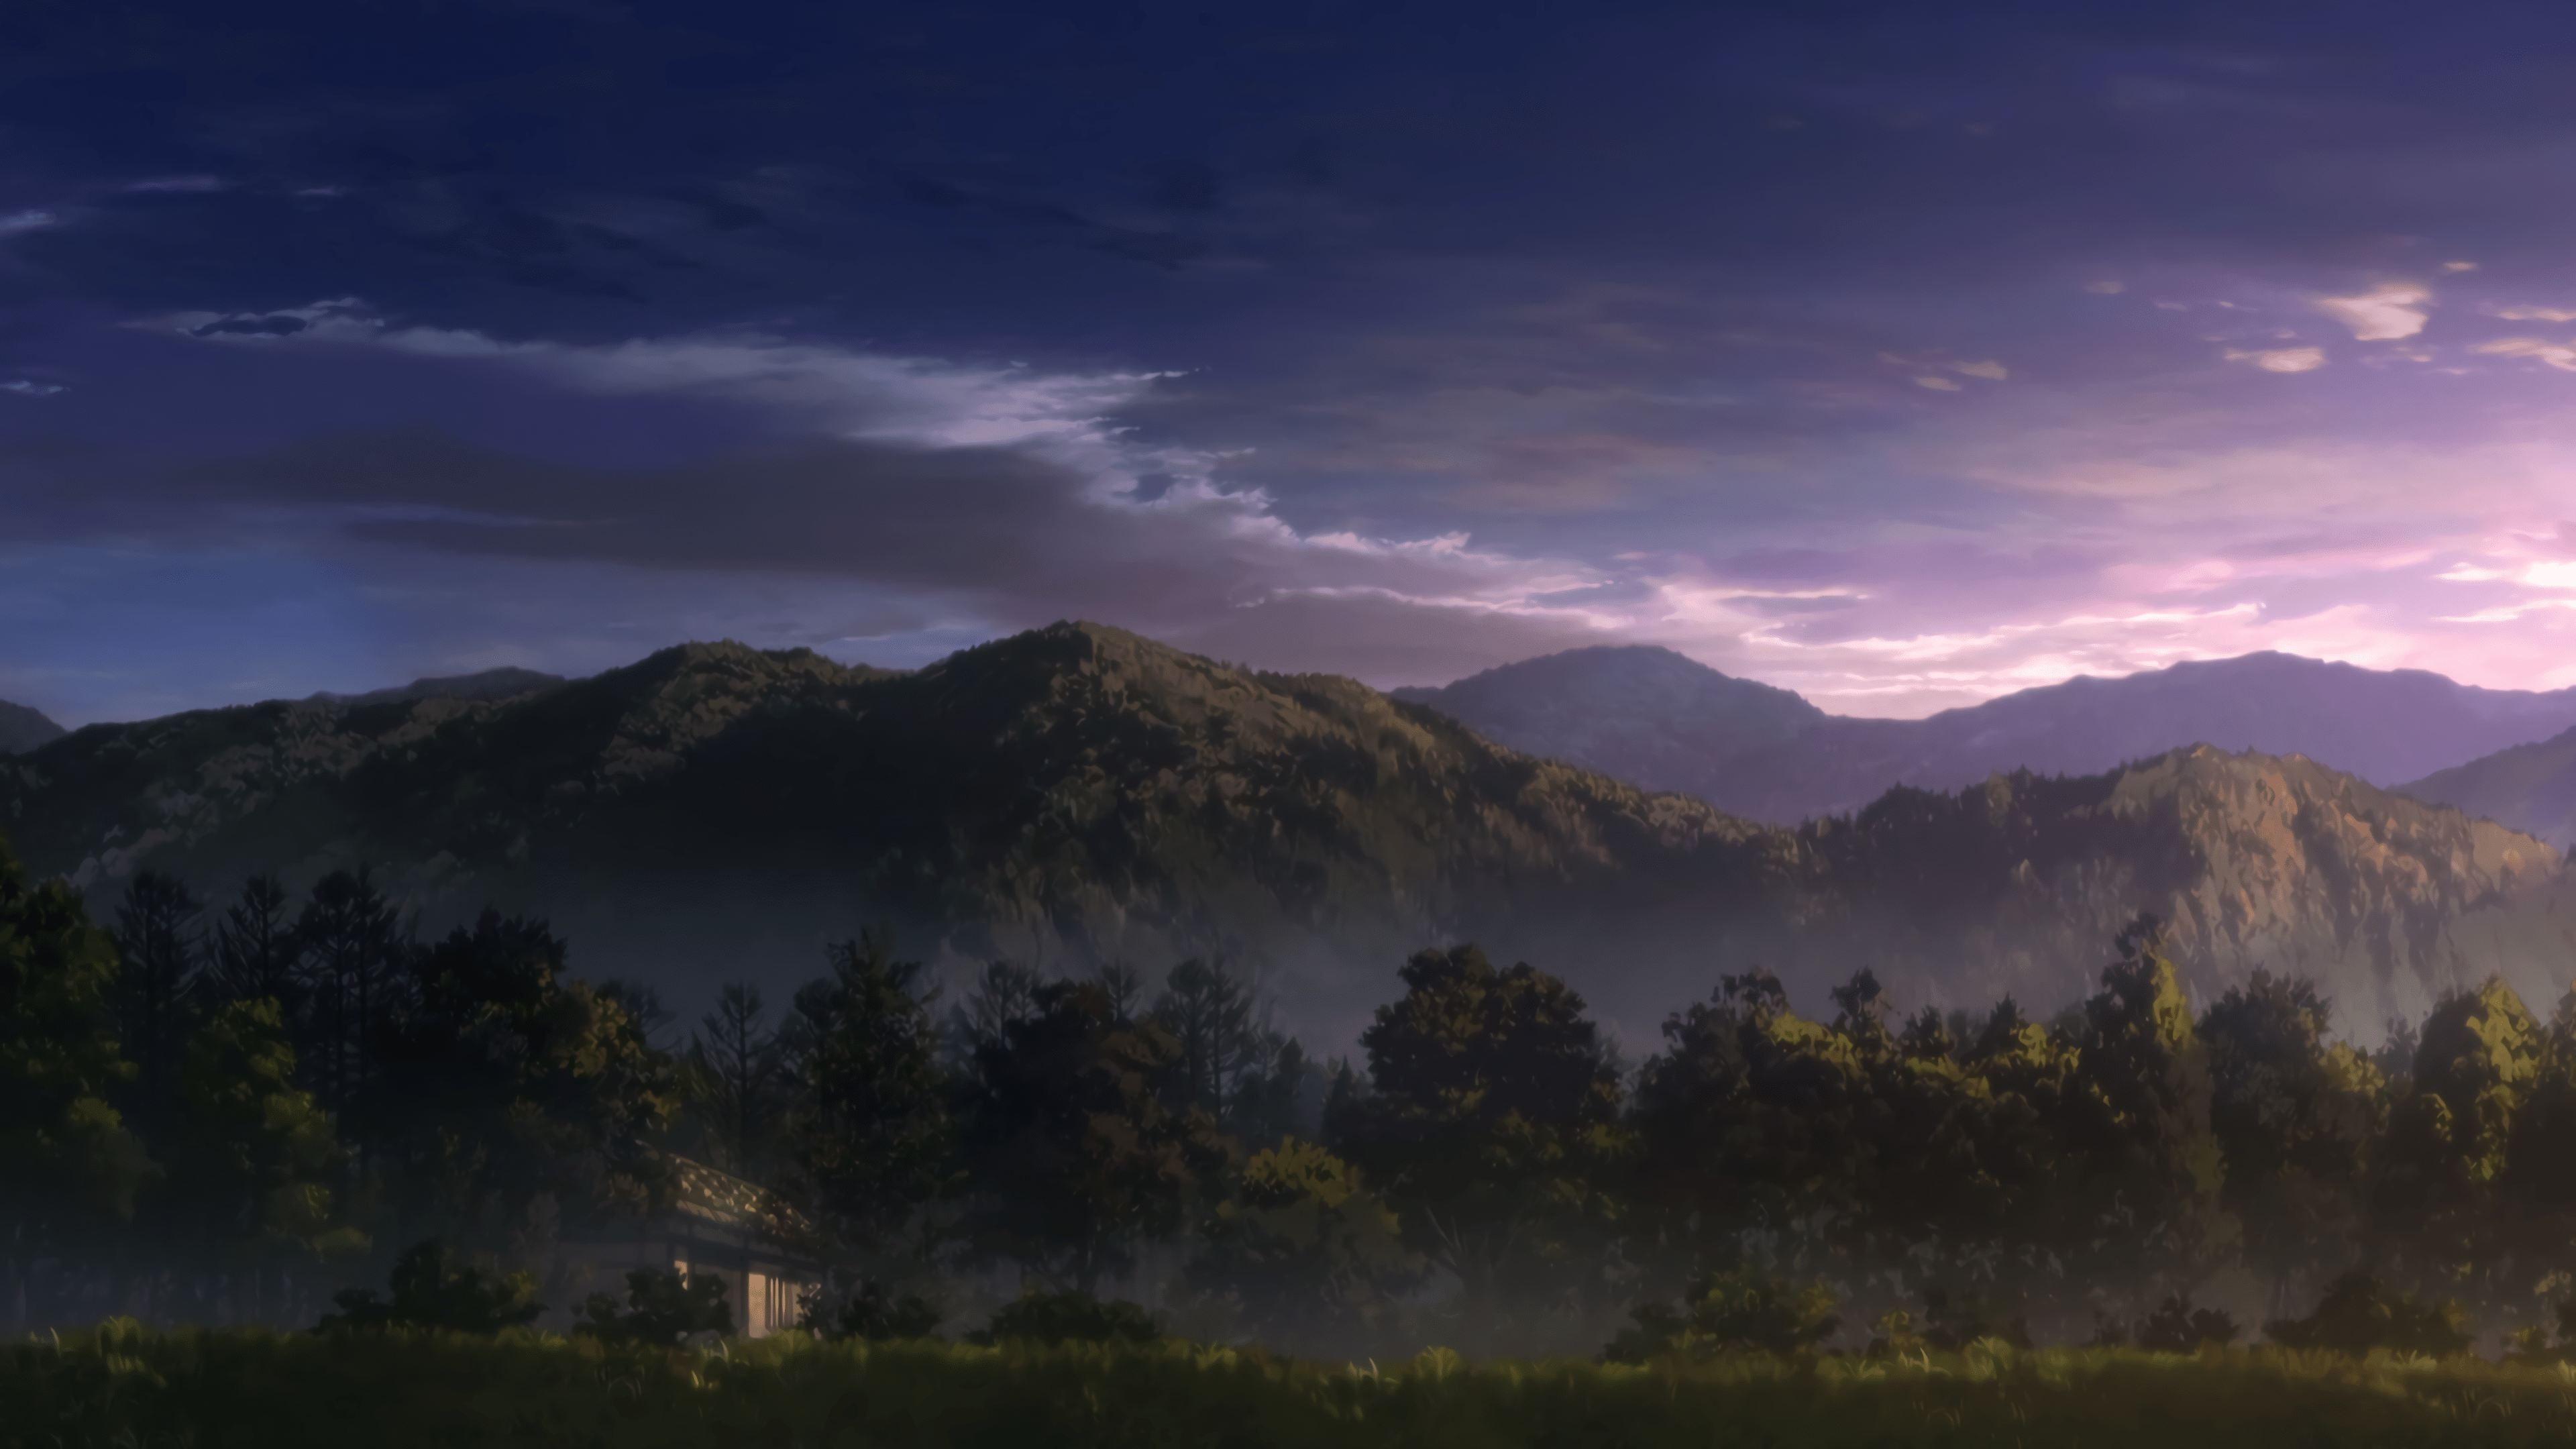 A sunset over the mountains with trees - Landscape, anime landscape, nature